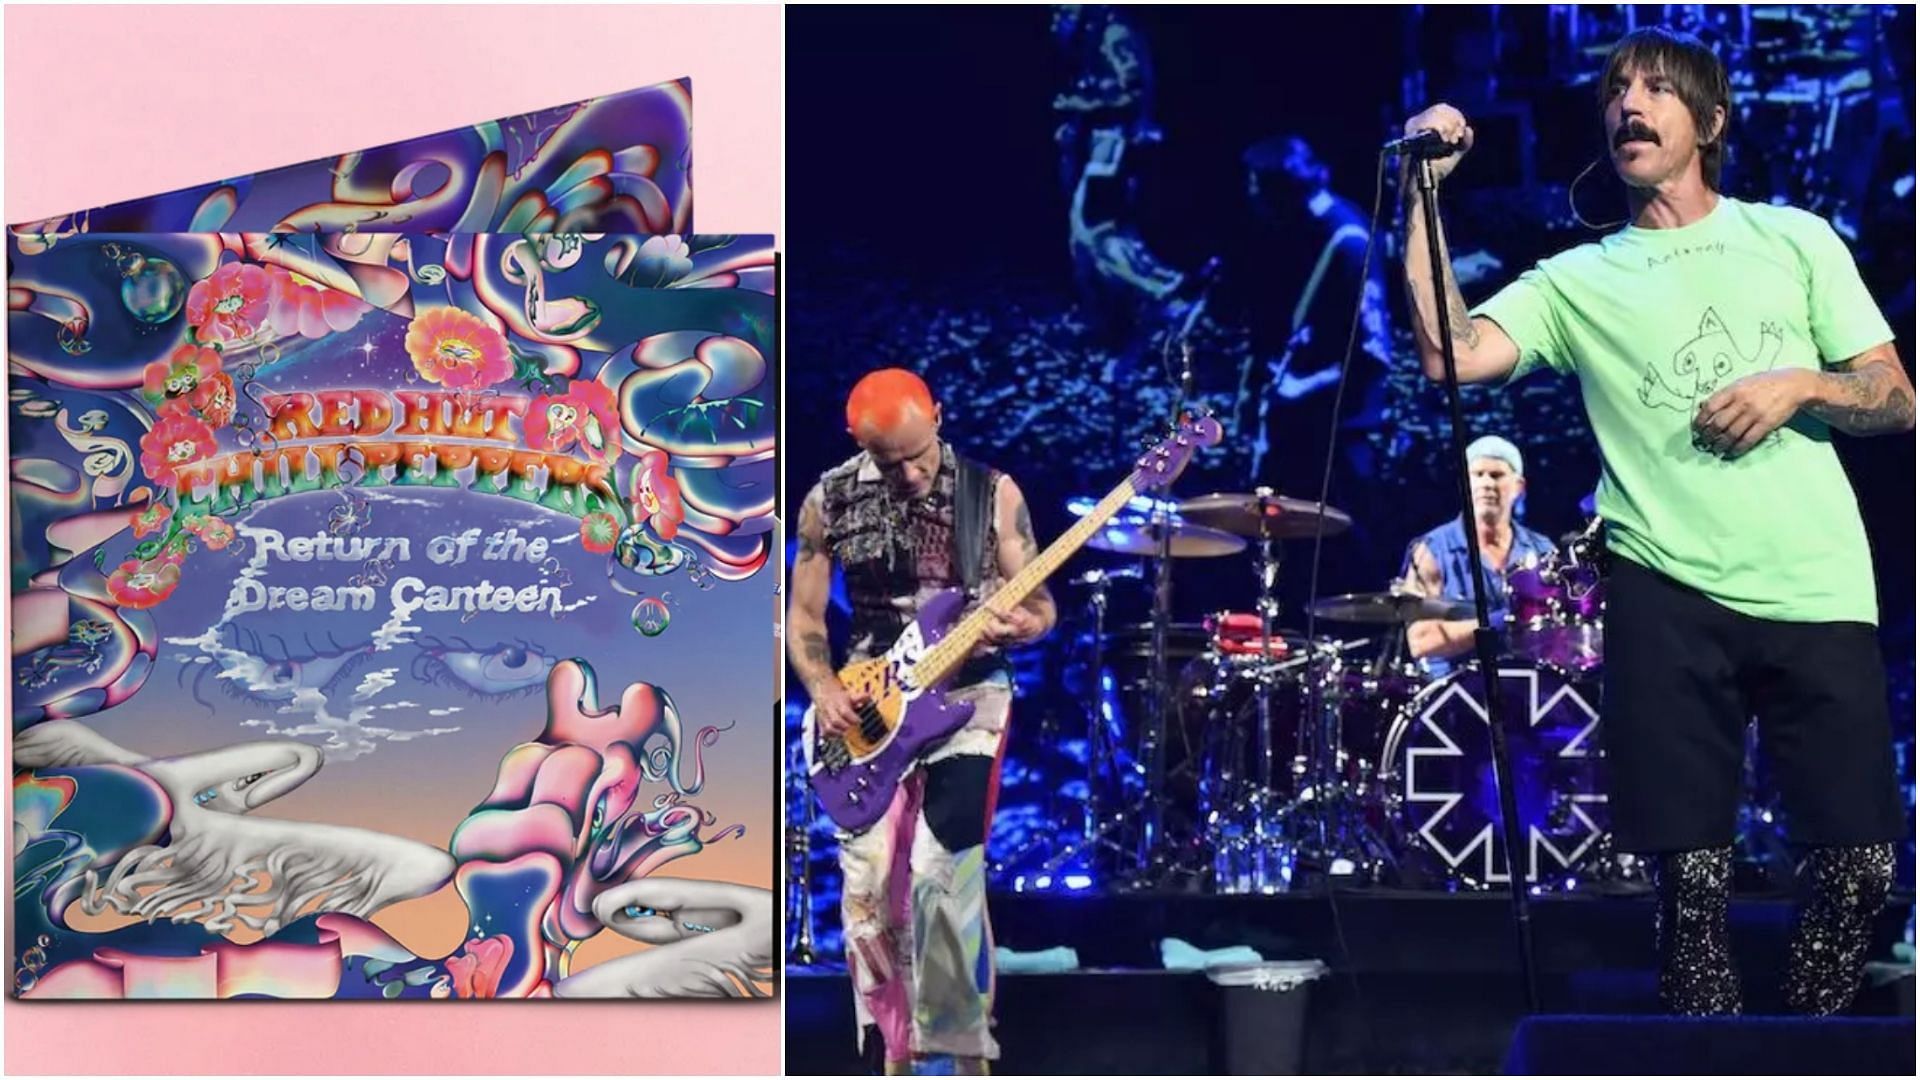 Red Hot Chilli Peppers have announced a double vinyl for their upcoming album. (Images via Instagram / @rhcp)